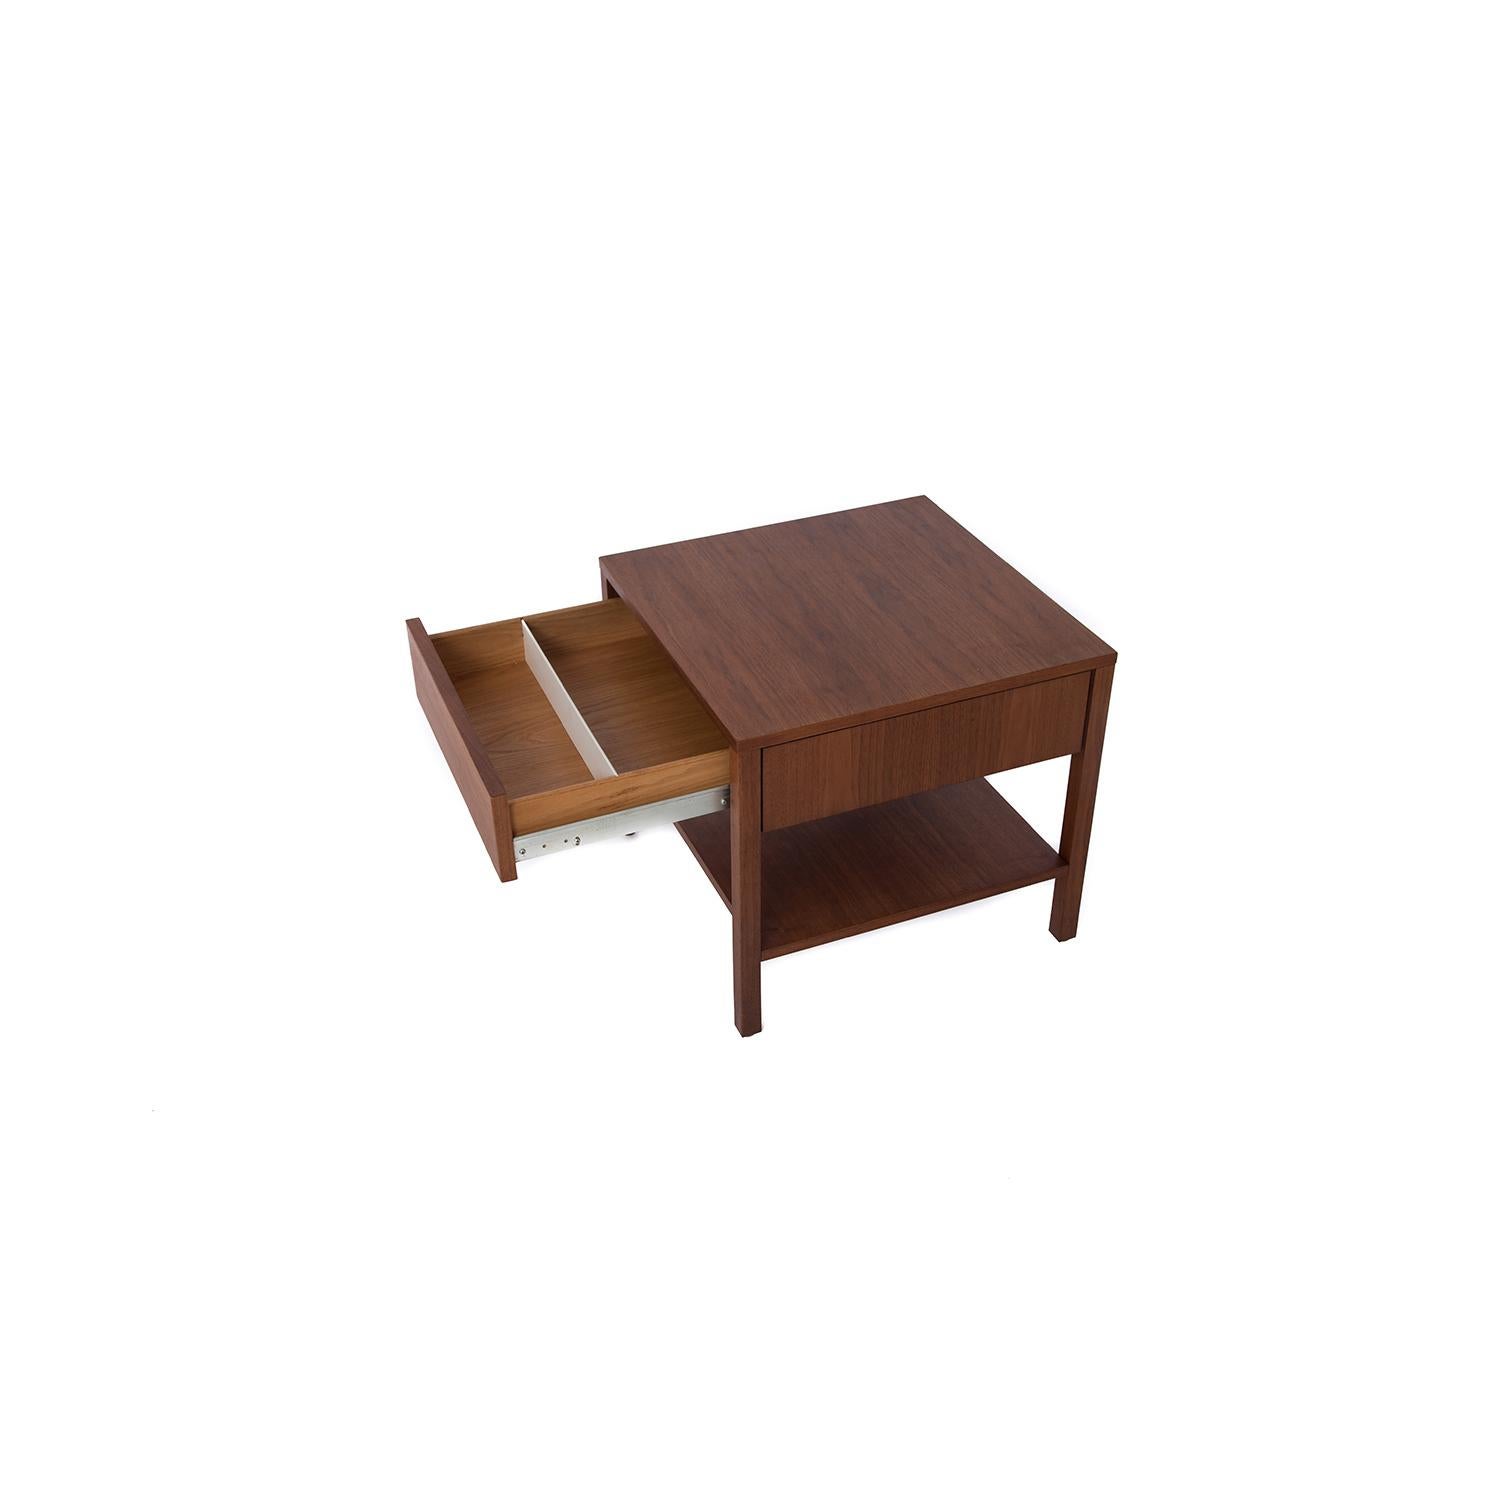 Mid-20th Century Pair of Side Tables with Drawer or Nightstands in Walnut by Florence Knoll